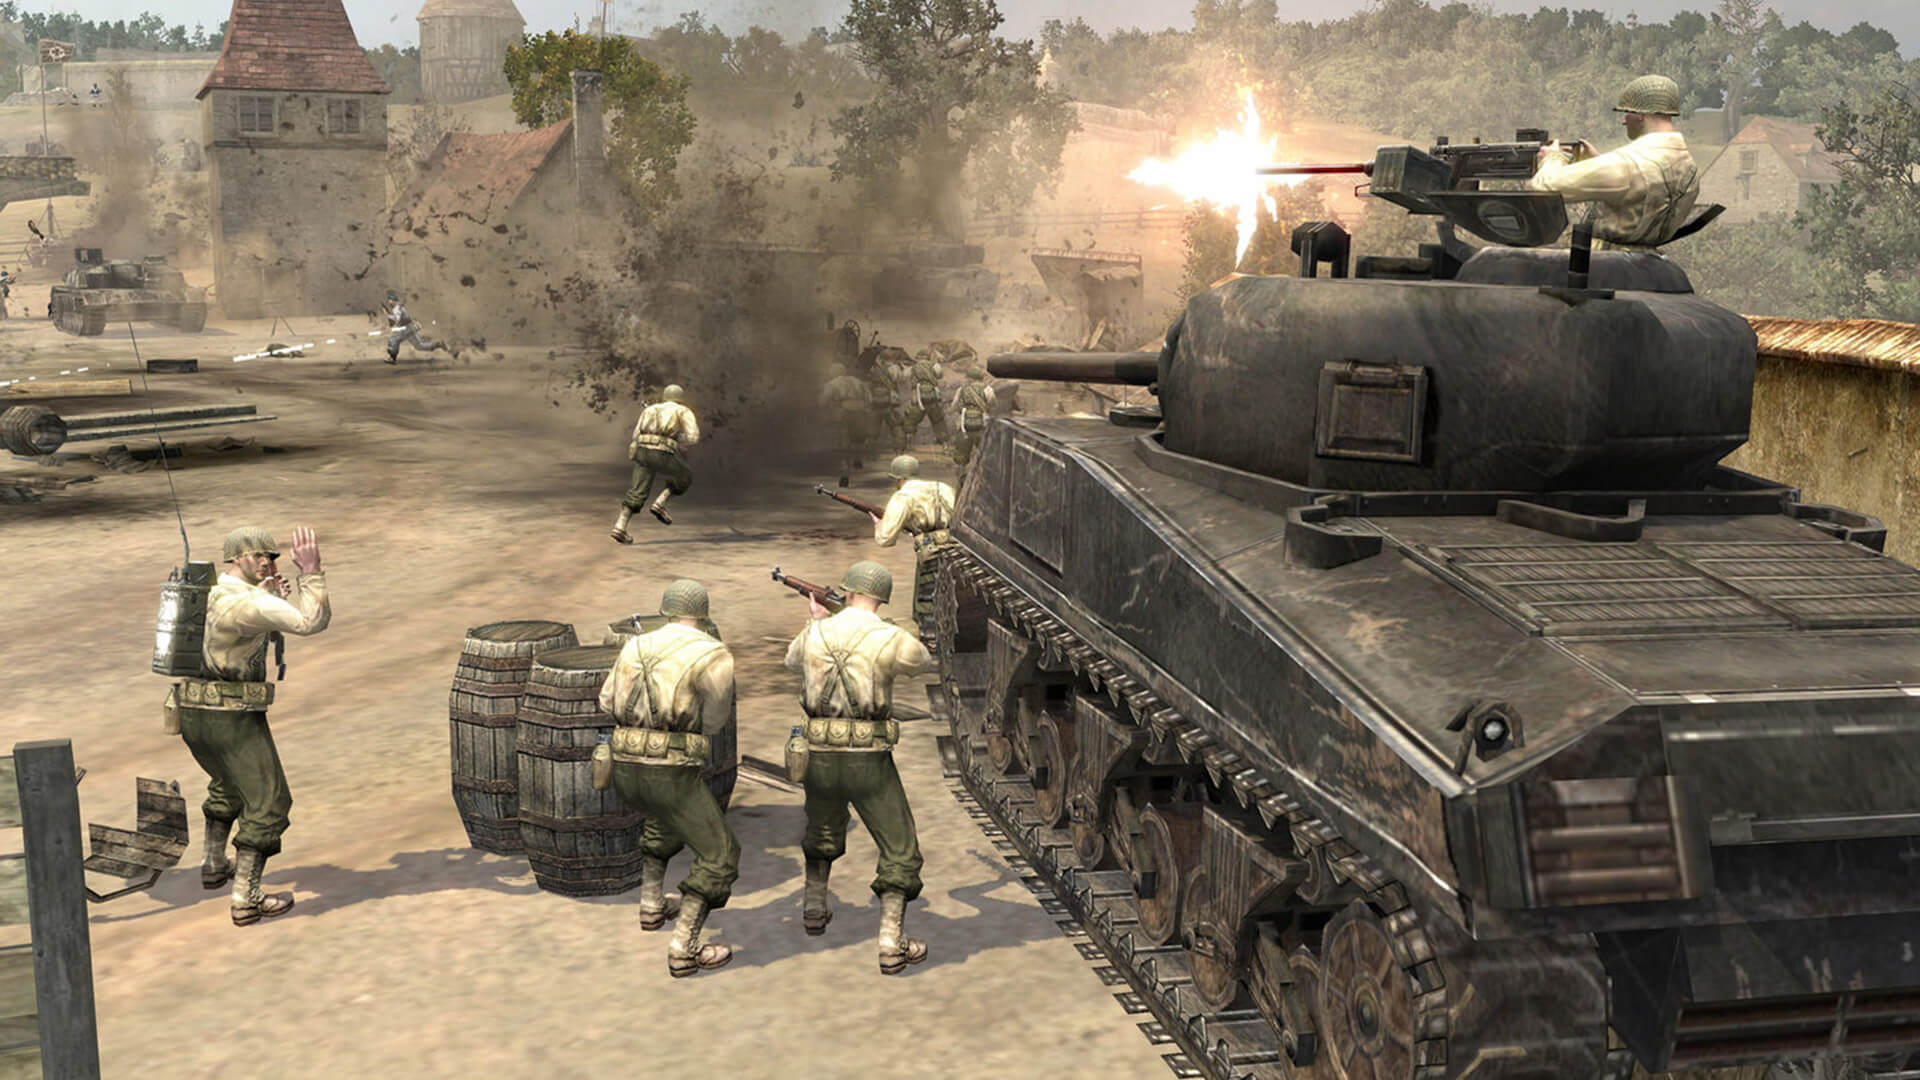 'Company of Heroes' was the perfect real-time strategy game